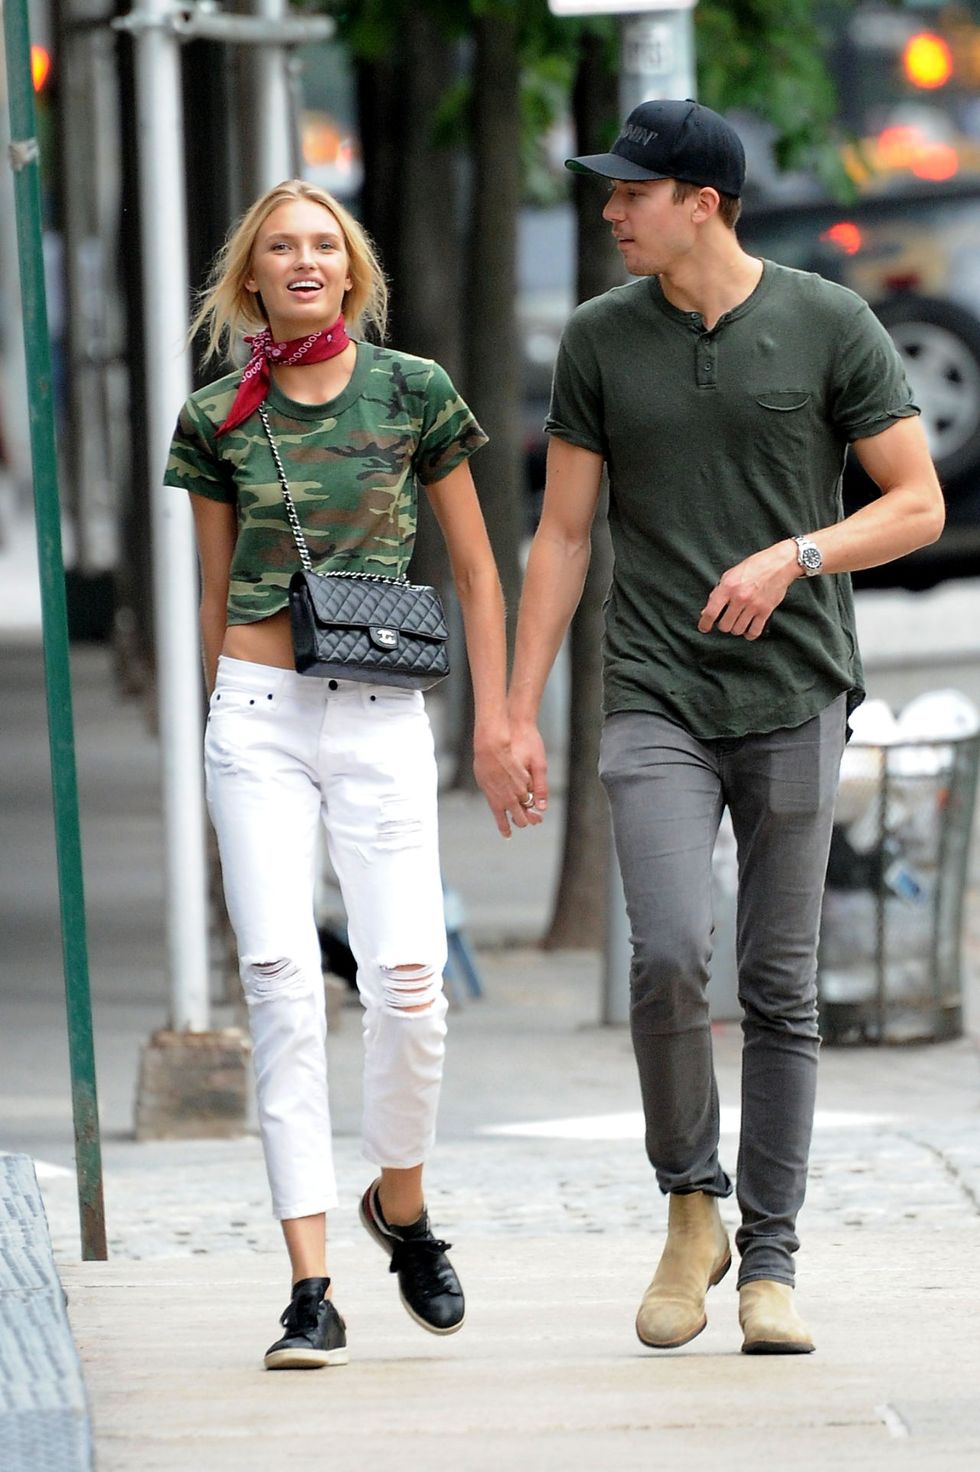 NEW YORK, NY - JULY 07: EXCLUSIVE: Model Romee Strijd and boyfriend Laurens van Leeuwen are seen out in Tribeca on July 07, 2016 in New York, NY. (Photo by Josiah Kamau/BuzzFoto via Getty Images)